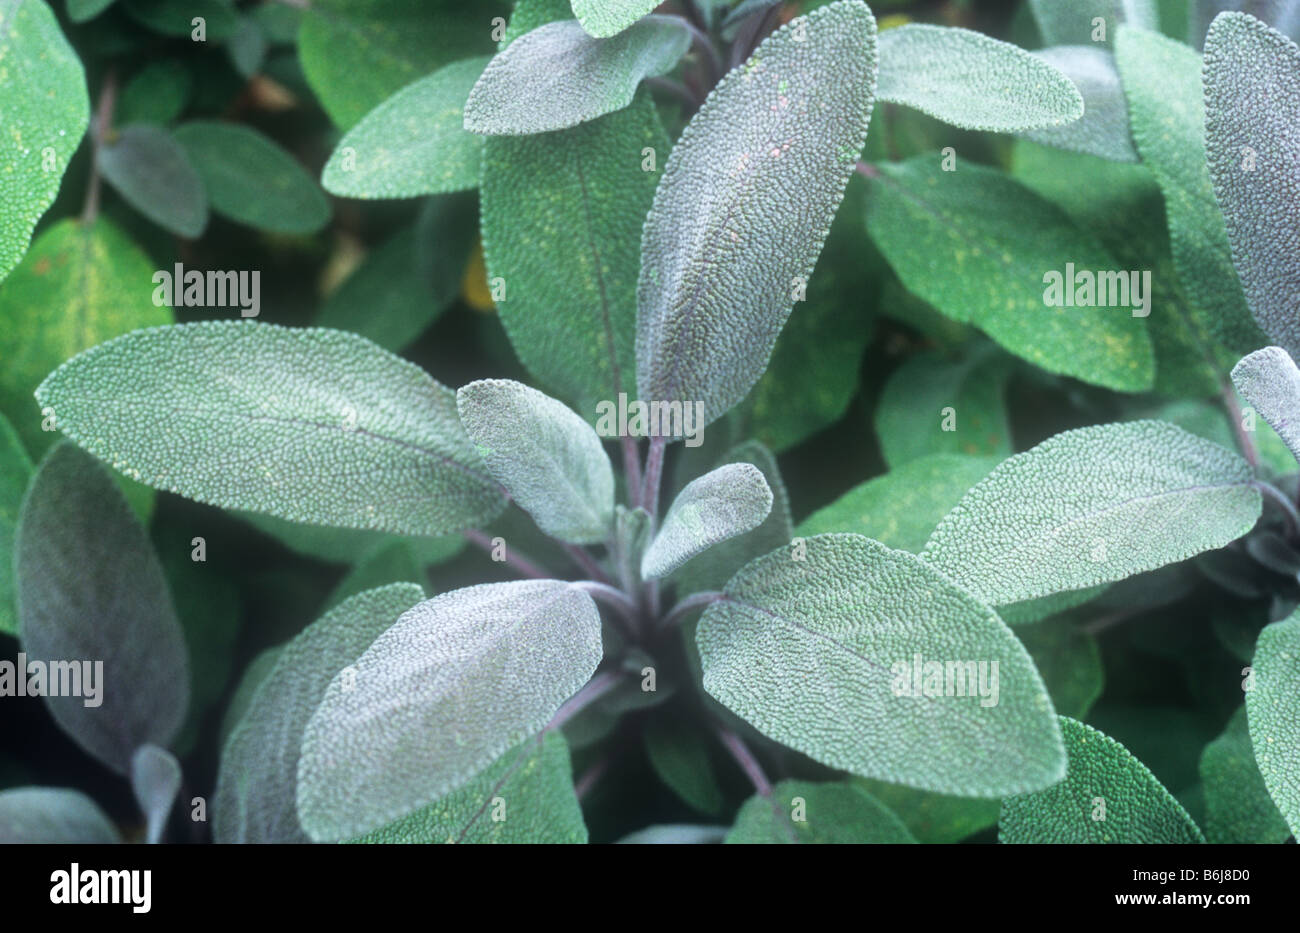 Close up of grey-green and pale purple leaves of hardy perennial herb plant Sage or Salvia nemorosa Purpurascens Stock Photo